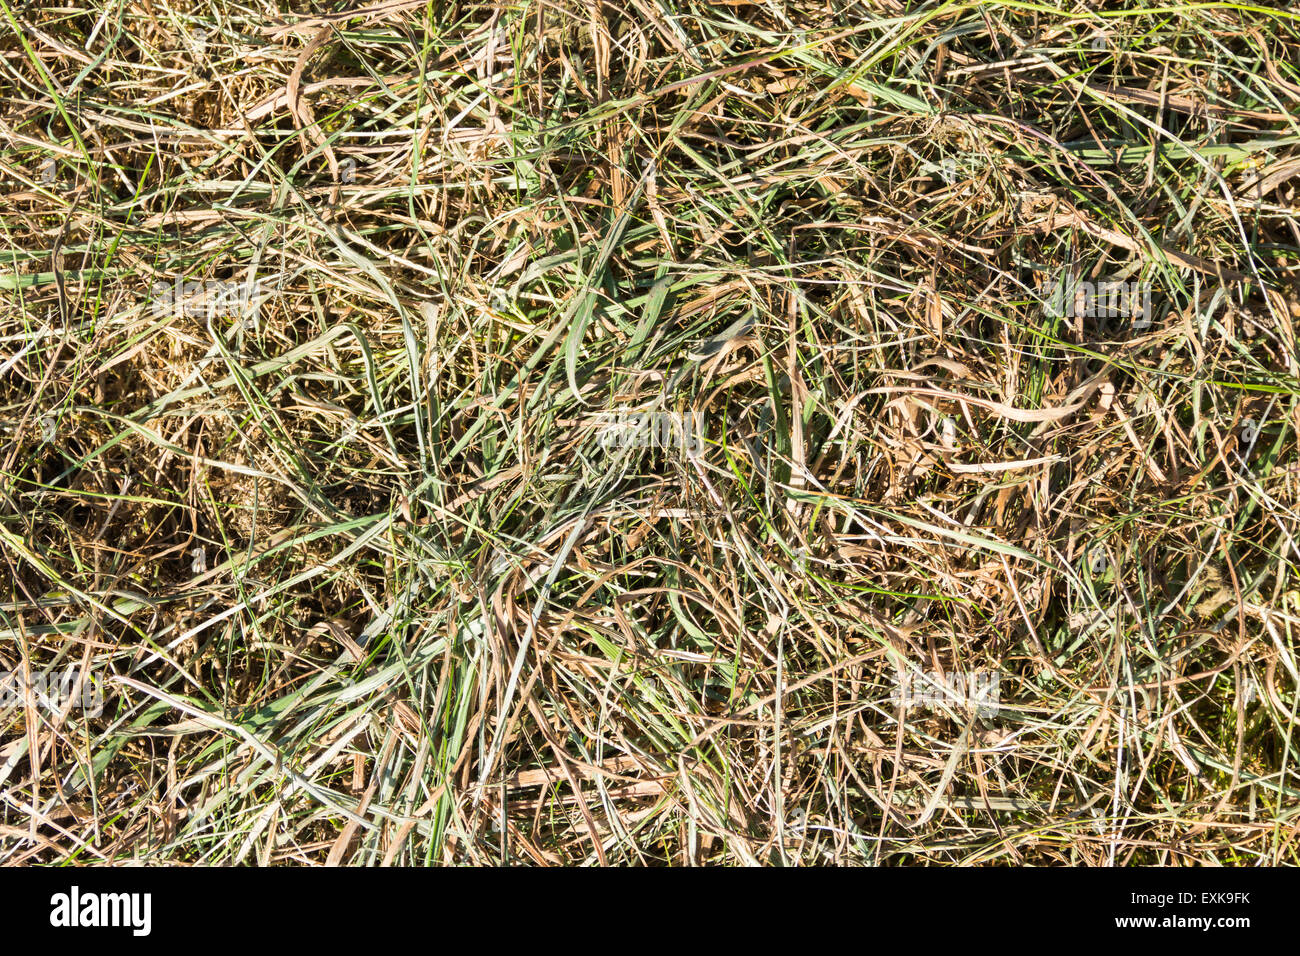 Close up of recently mown arable field of grass with mown grass left scattered to dry. Stock Photo